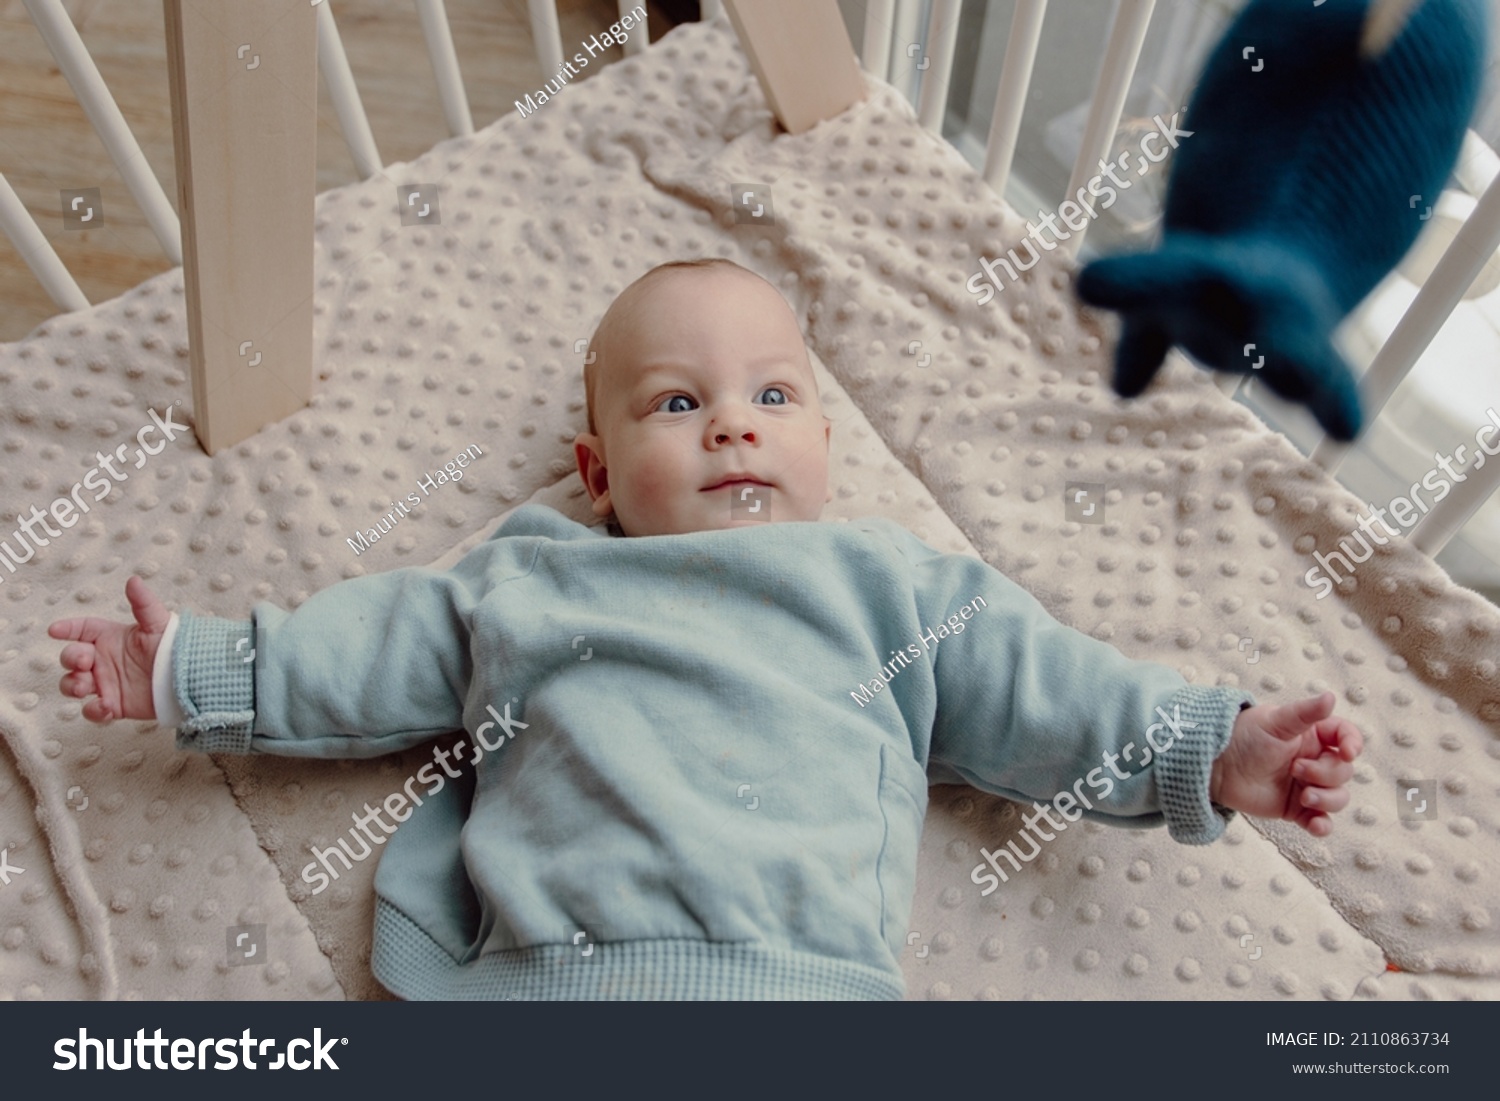 Adorable four month old baby boy laying in play pen looking around smiling. Wears a blue sweater and has blue eyes. #2110863734